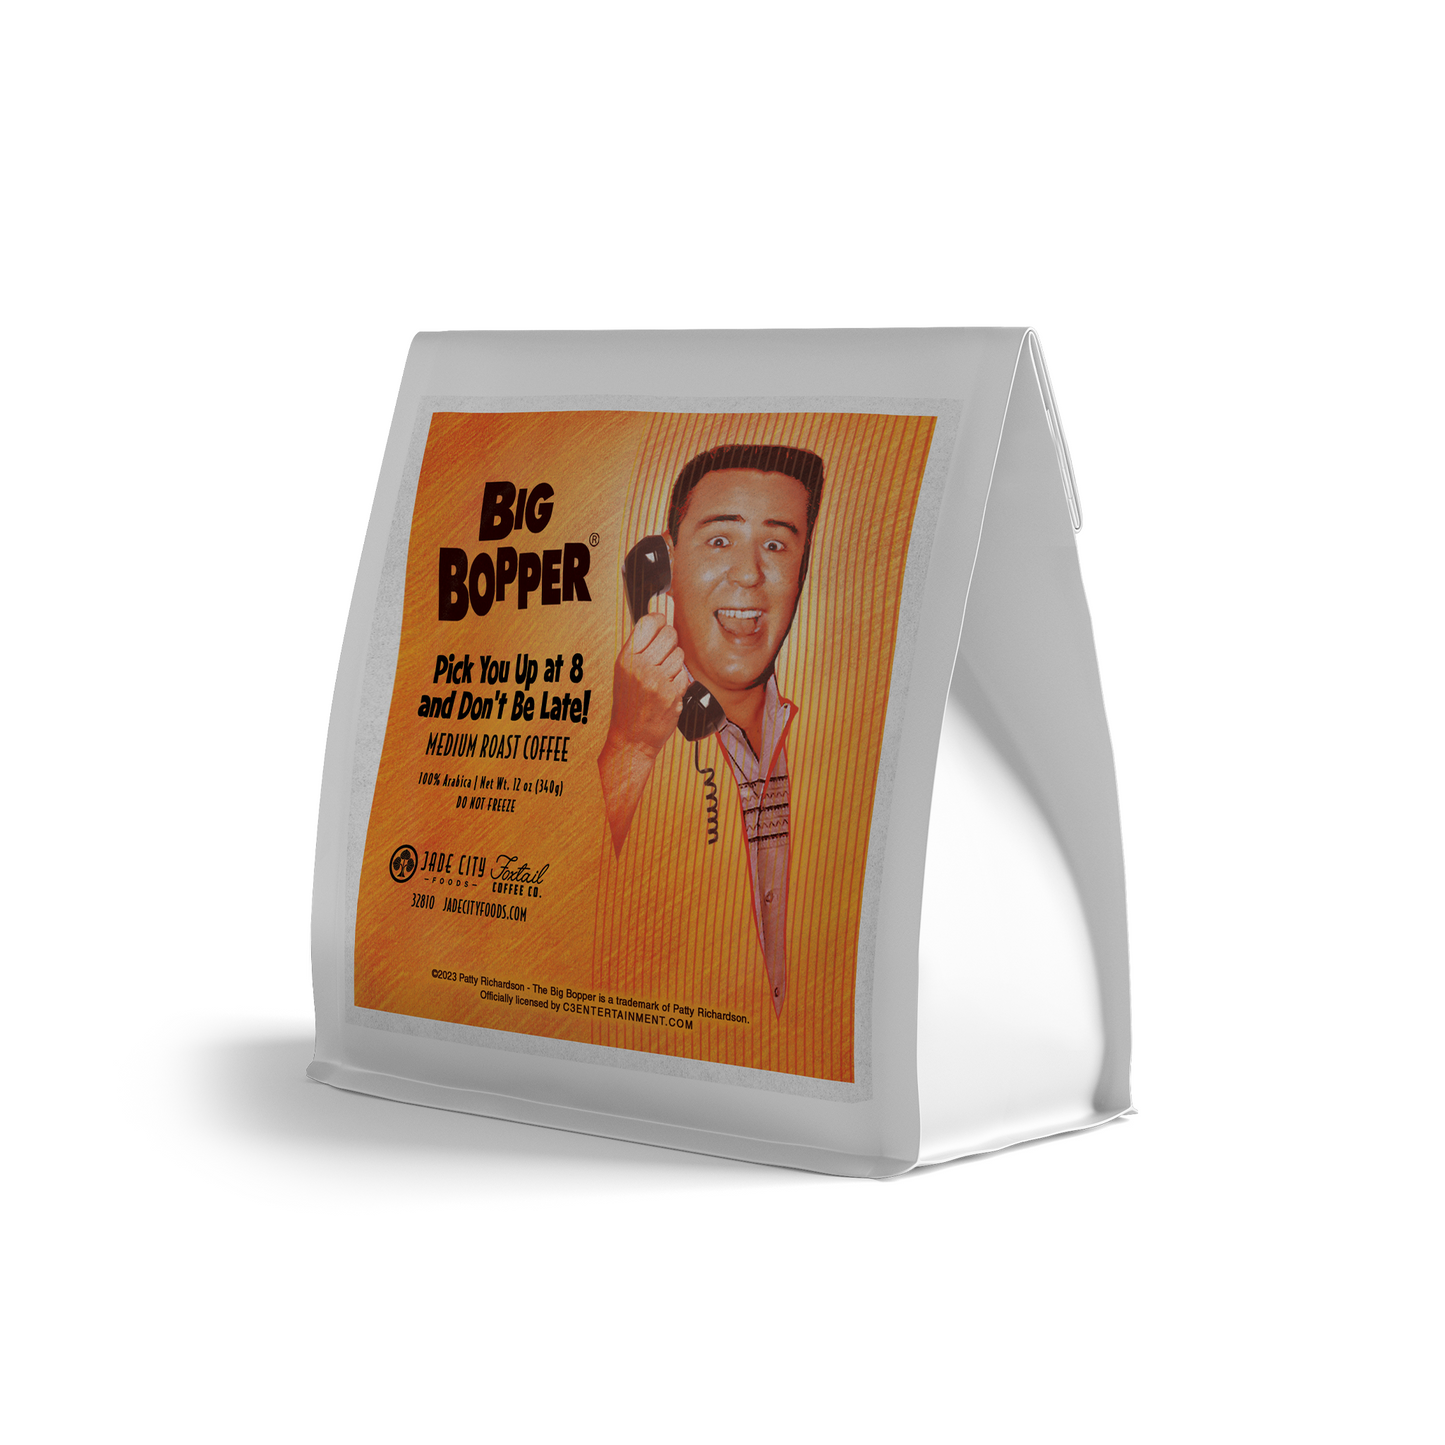 Big Bopper's Pick You Up At 8 And Don't Be Late! : Medium Roast Coffee